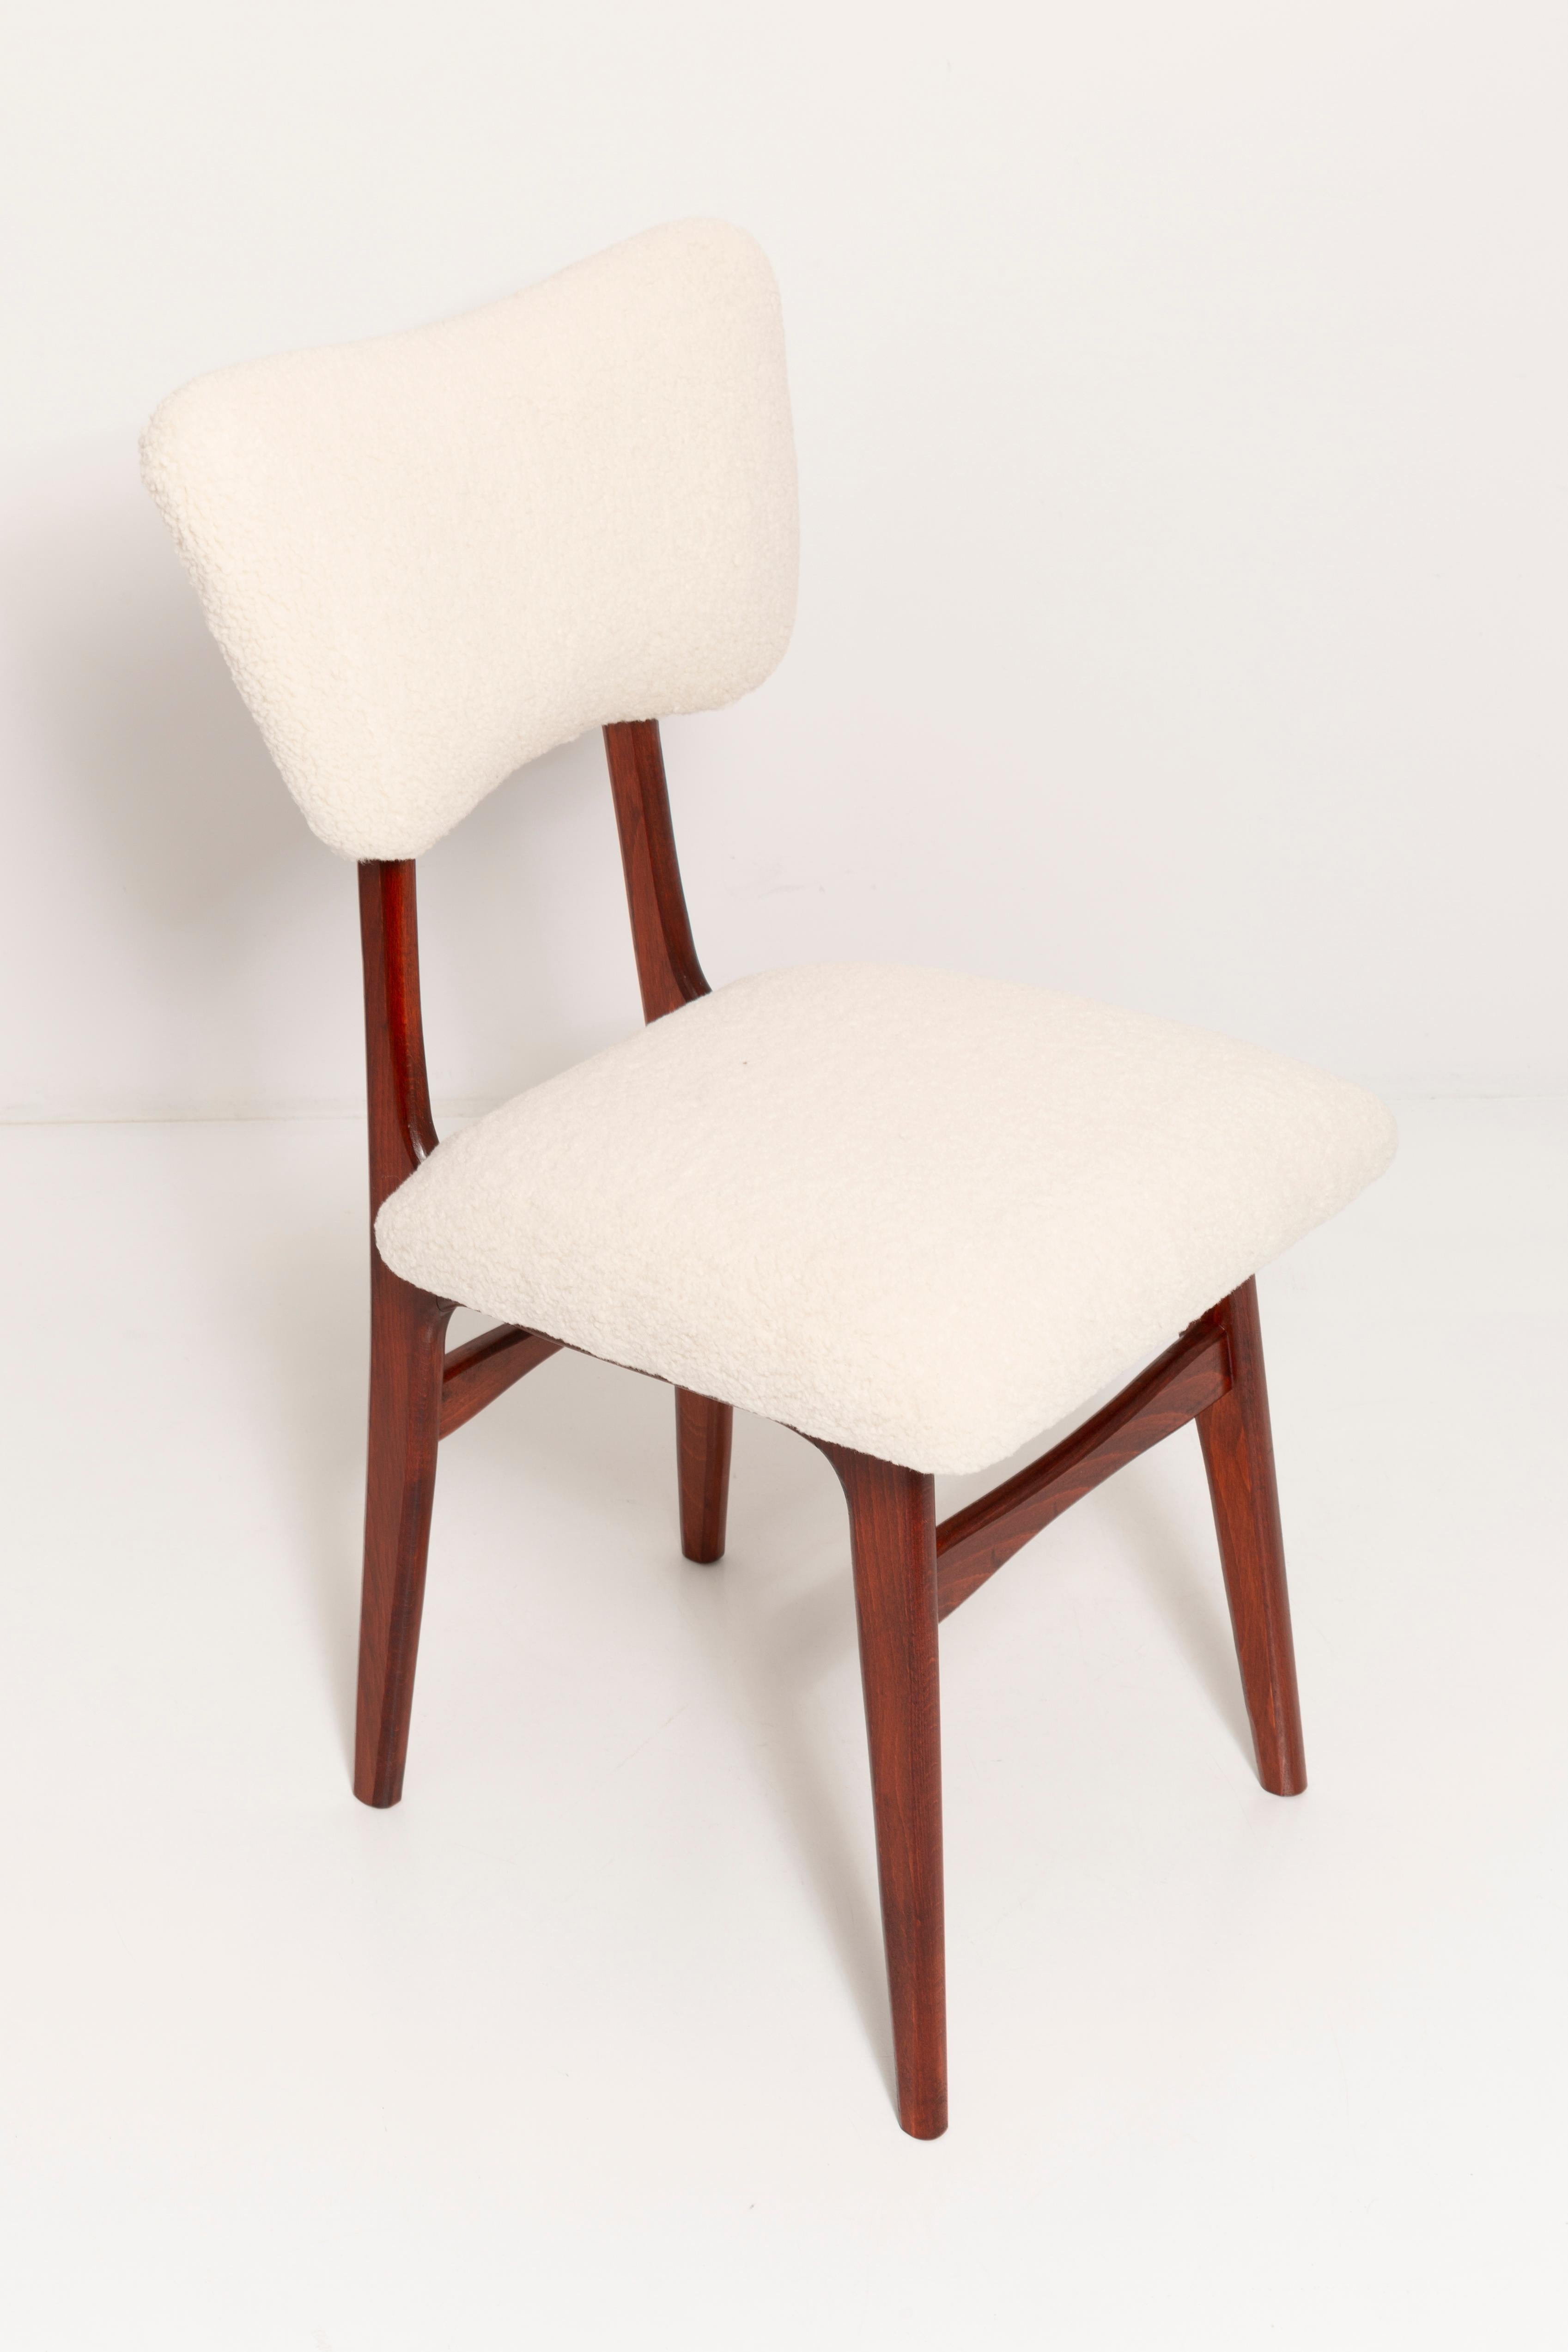 Woodwork Six Light Cream Boucle 'Butterfly' Chairs, Europe, 1960s For Sale